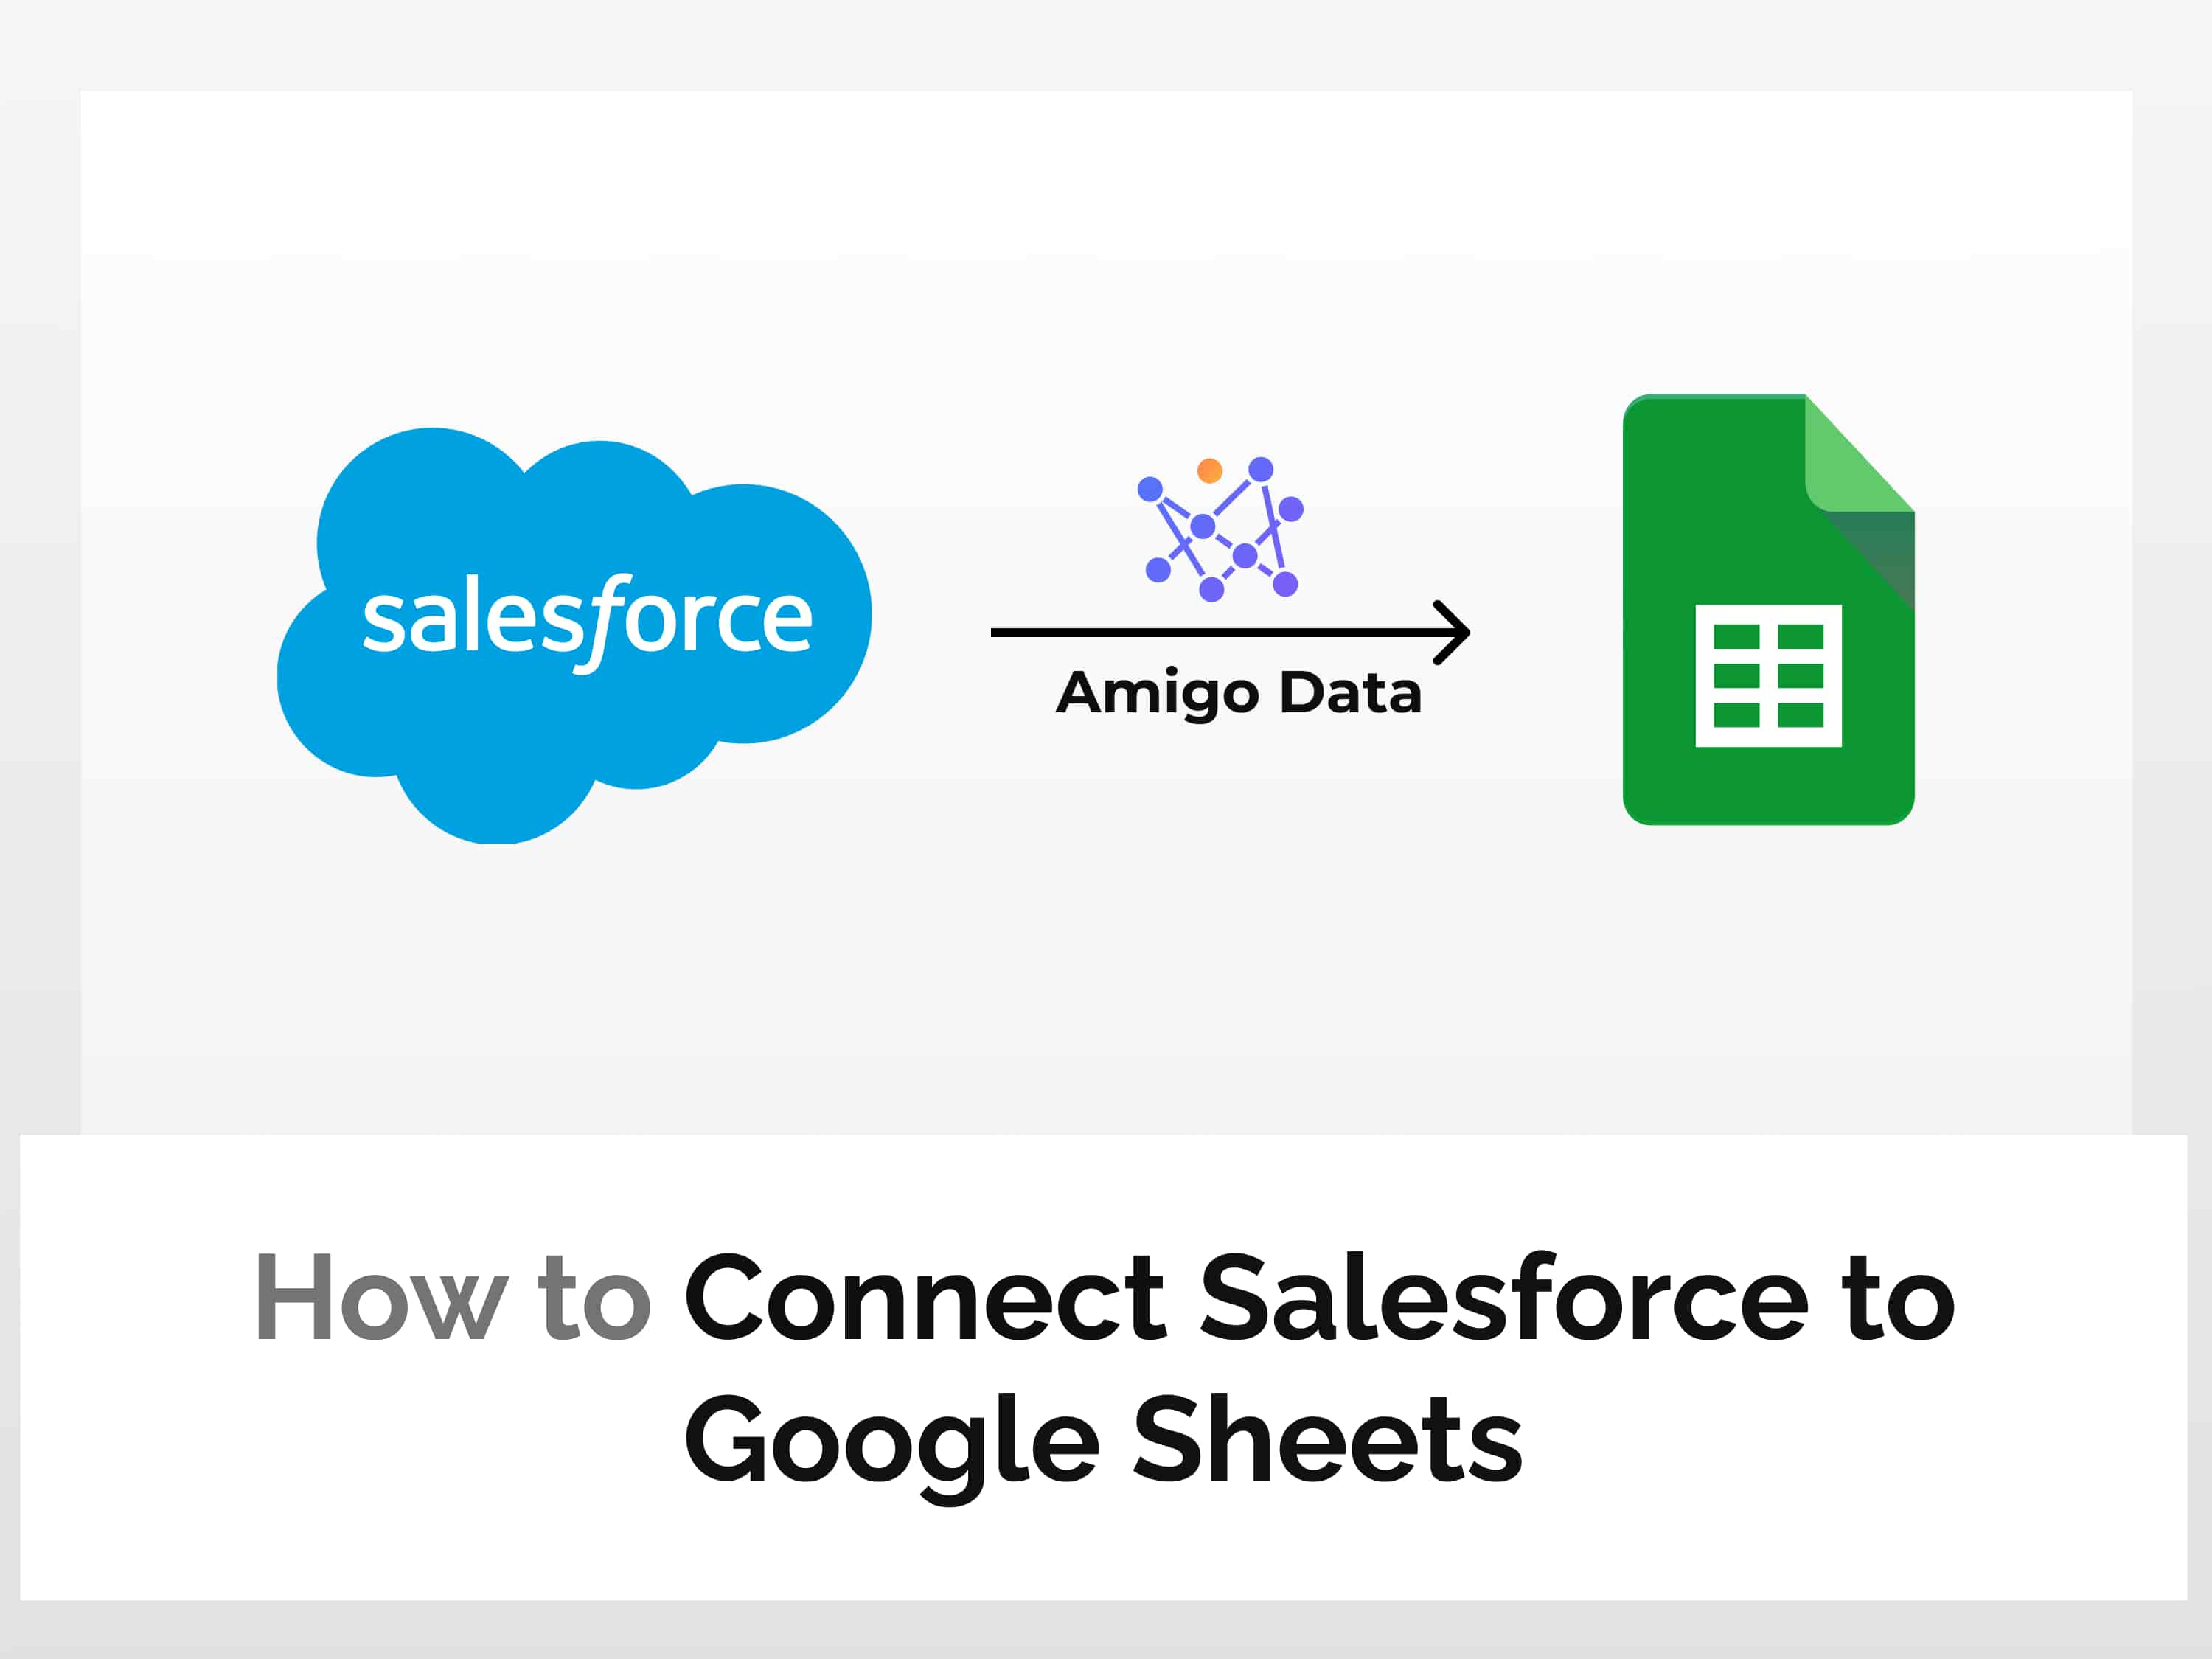 Connect Salesforce to Google Sheets and automate data exports